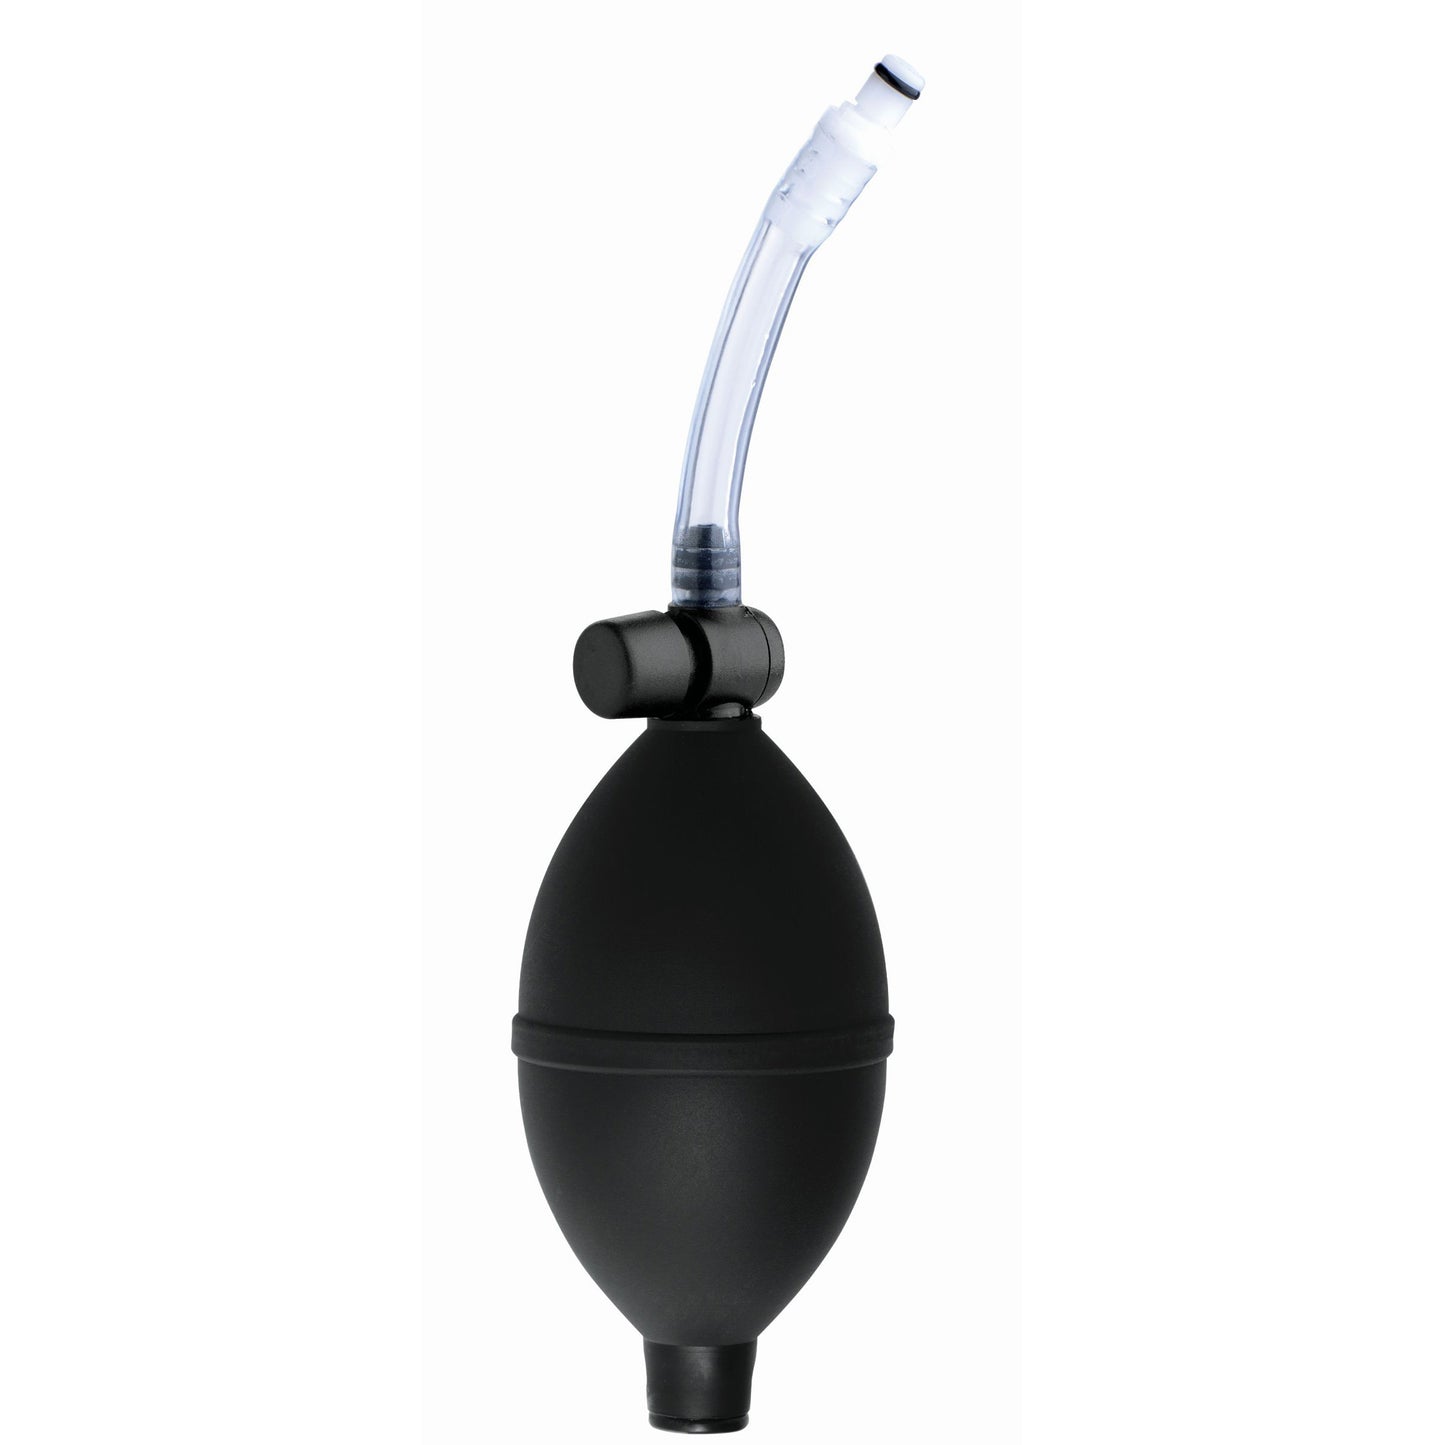 Clitoral Pumping System with Detachable Acrylic Cylinder - UABDSM